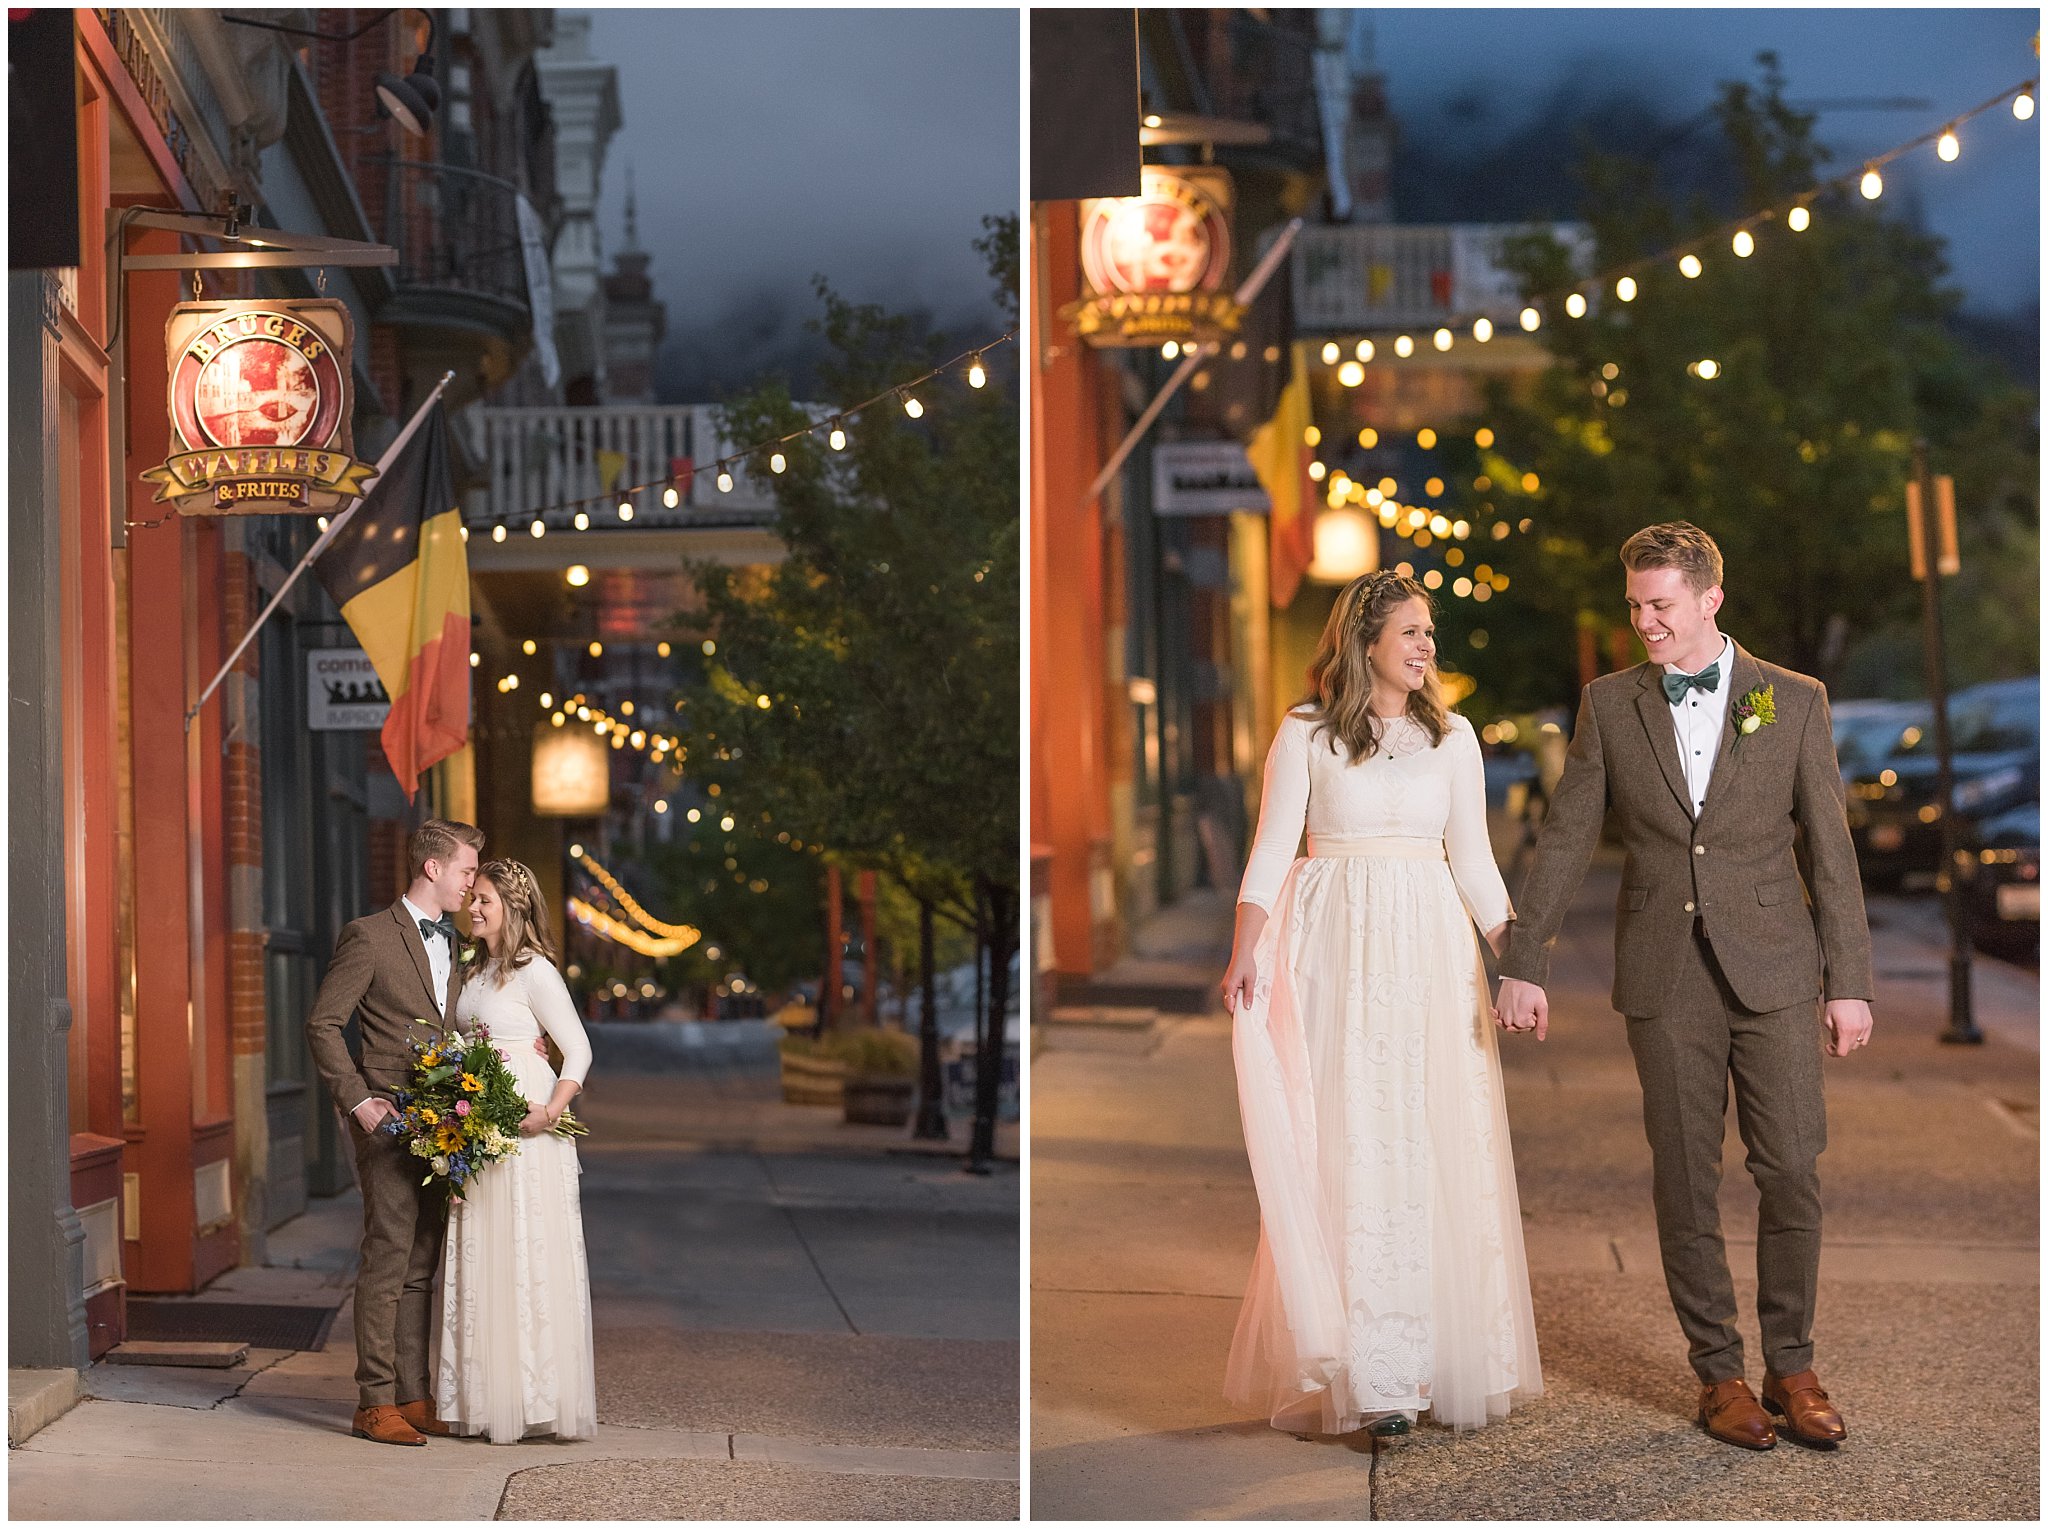 Bride wearing flowy dress and groom wearing tweed suit and green bow tie for vintage inspired wedding attire | Bruges Waffles at night | Provo City Center Temple Spring Formal Session | Jessie and Dallin Photography